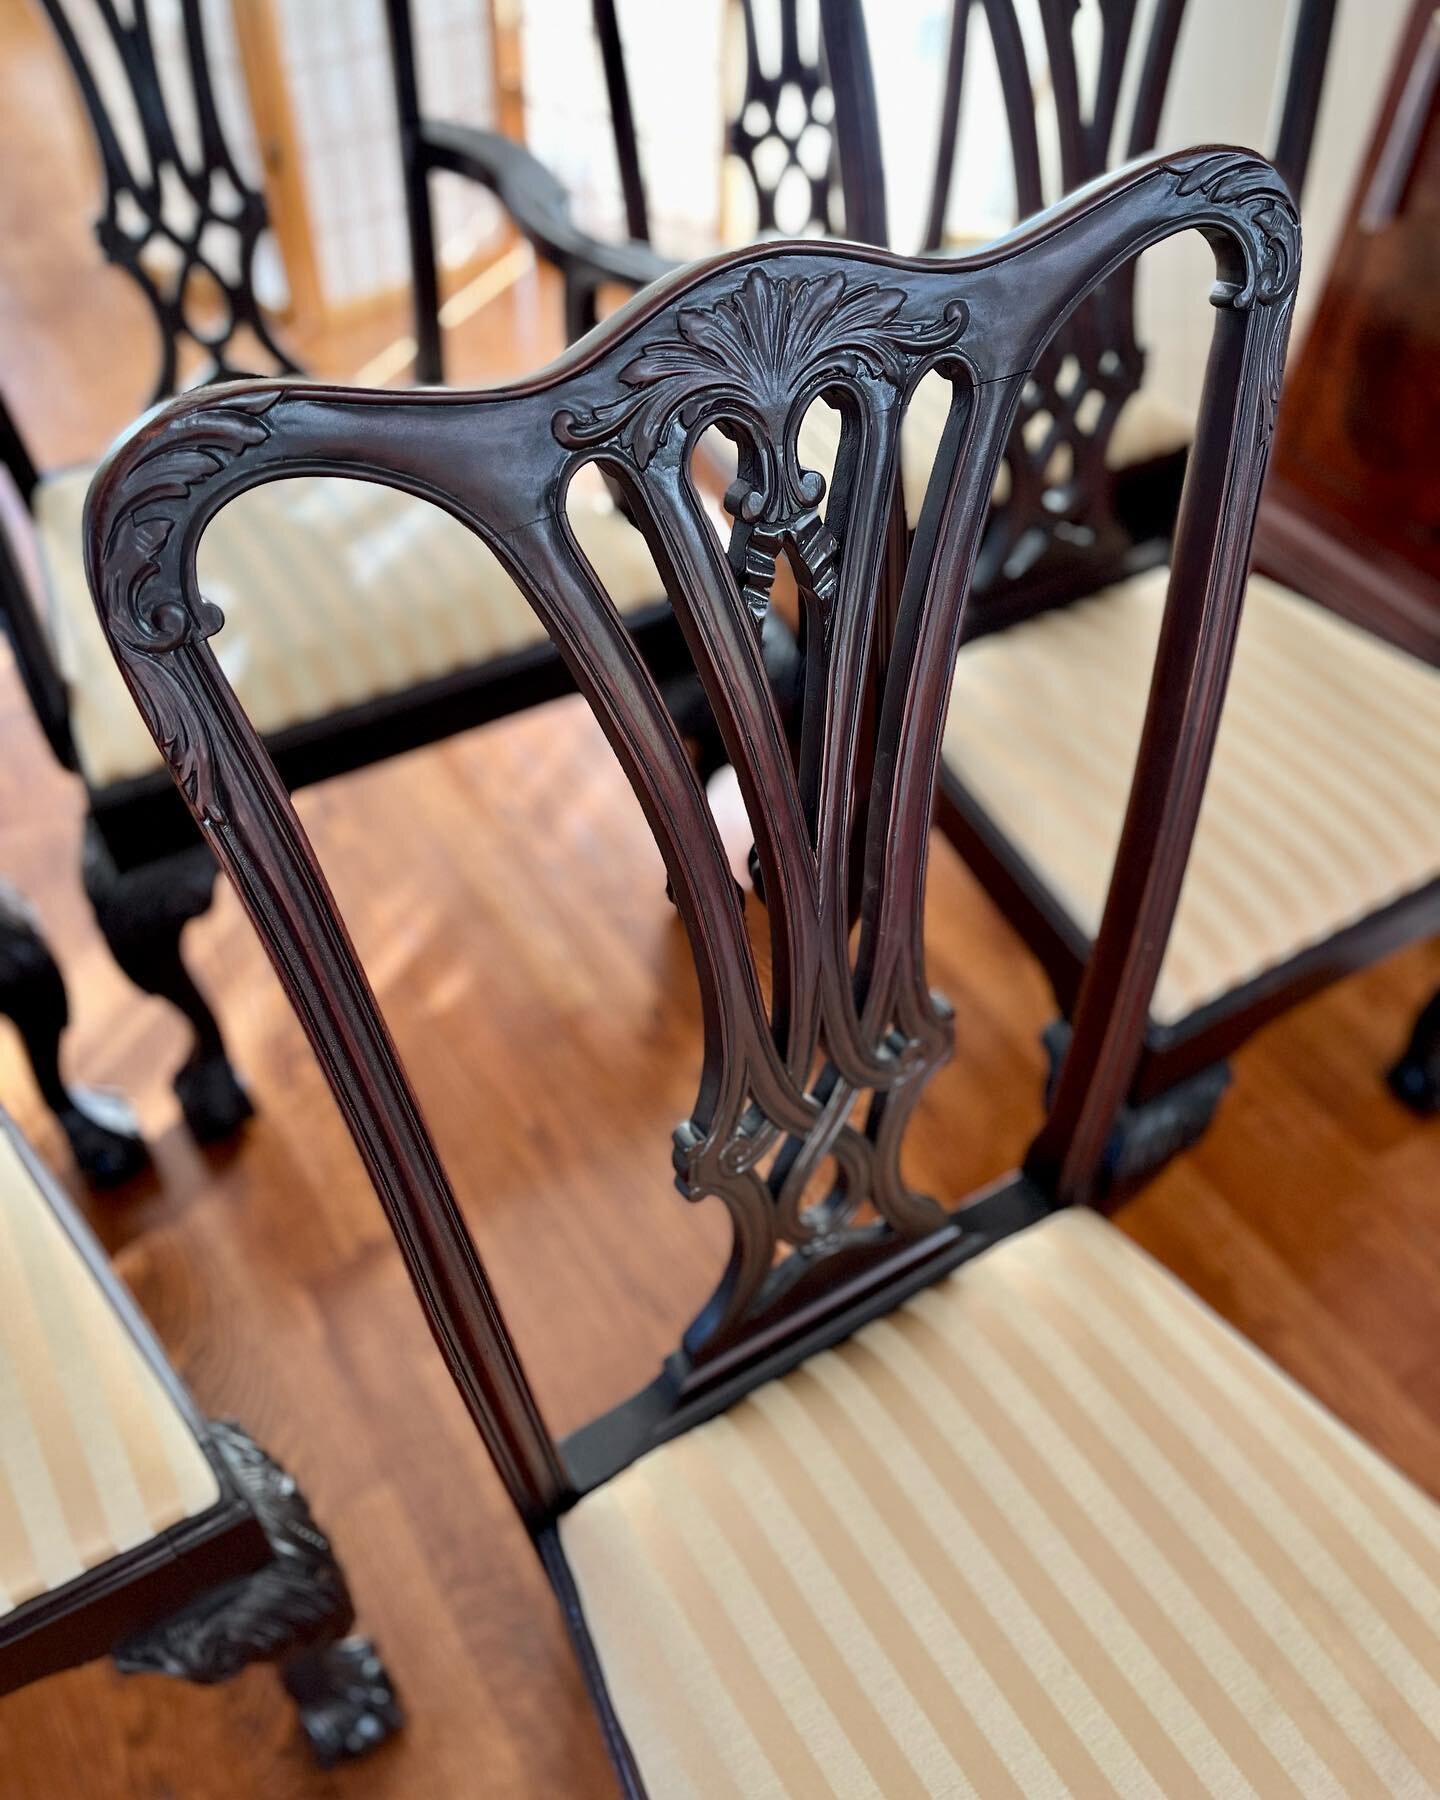 Set of 6 Chippendale style mahogany dining room chairs. I love the lighter look of these chairs - the backs have a sweetheart silhouette with delicately carved ribbons details. 

These chairs are a great choice if you are looking to create a traditio